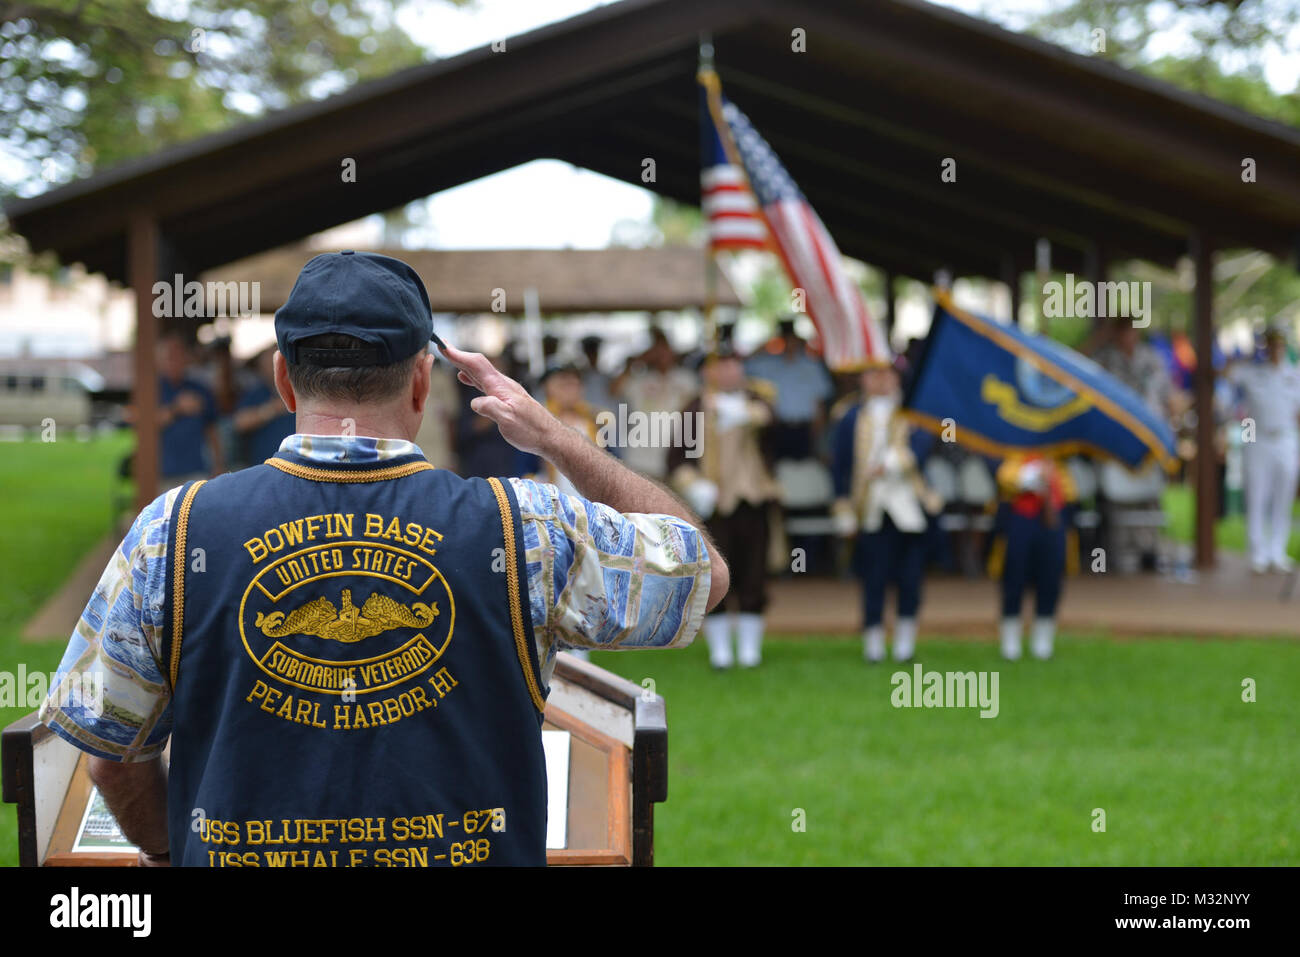 160530-N-LY160-735  JOINT BASE PEARL HARBOR-HICKAM, Hawaii (May 30, 2016) – Retired Lt. Cmdr. Paul T. Jurcsak, base commander of the U.S. Submarine Veterans Bowfin Base, salutes the national ensign during the Memorial Day ceremony at the USS Parche Submarine Park and Memorial at Joint Base Pearl Harbor-Hickam. The service honored past submariners and paid tribute to the 65 U.S. submarines lost since 1915, with 52 lost during World War II alone.  (U.S. Navy photo by Mass Communication Specialist 2nd Class Michael H. Lee) 160530-N-LY160-735 27428259625 o Stock Photo